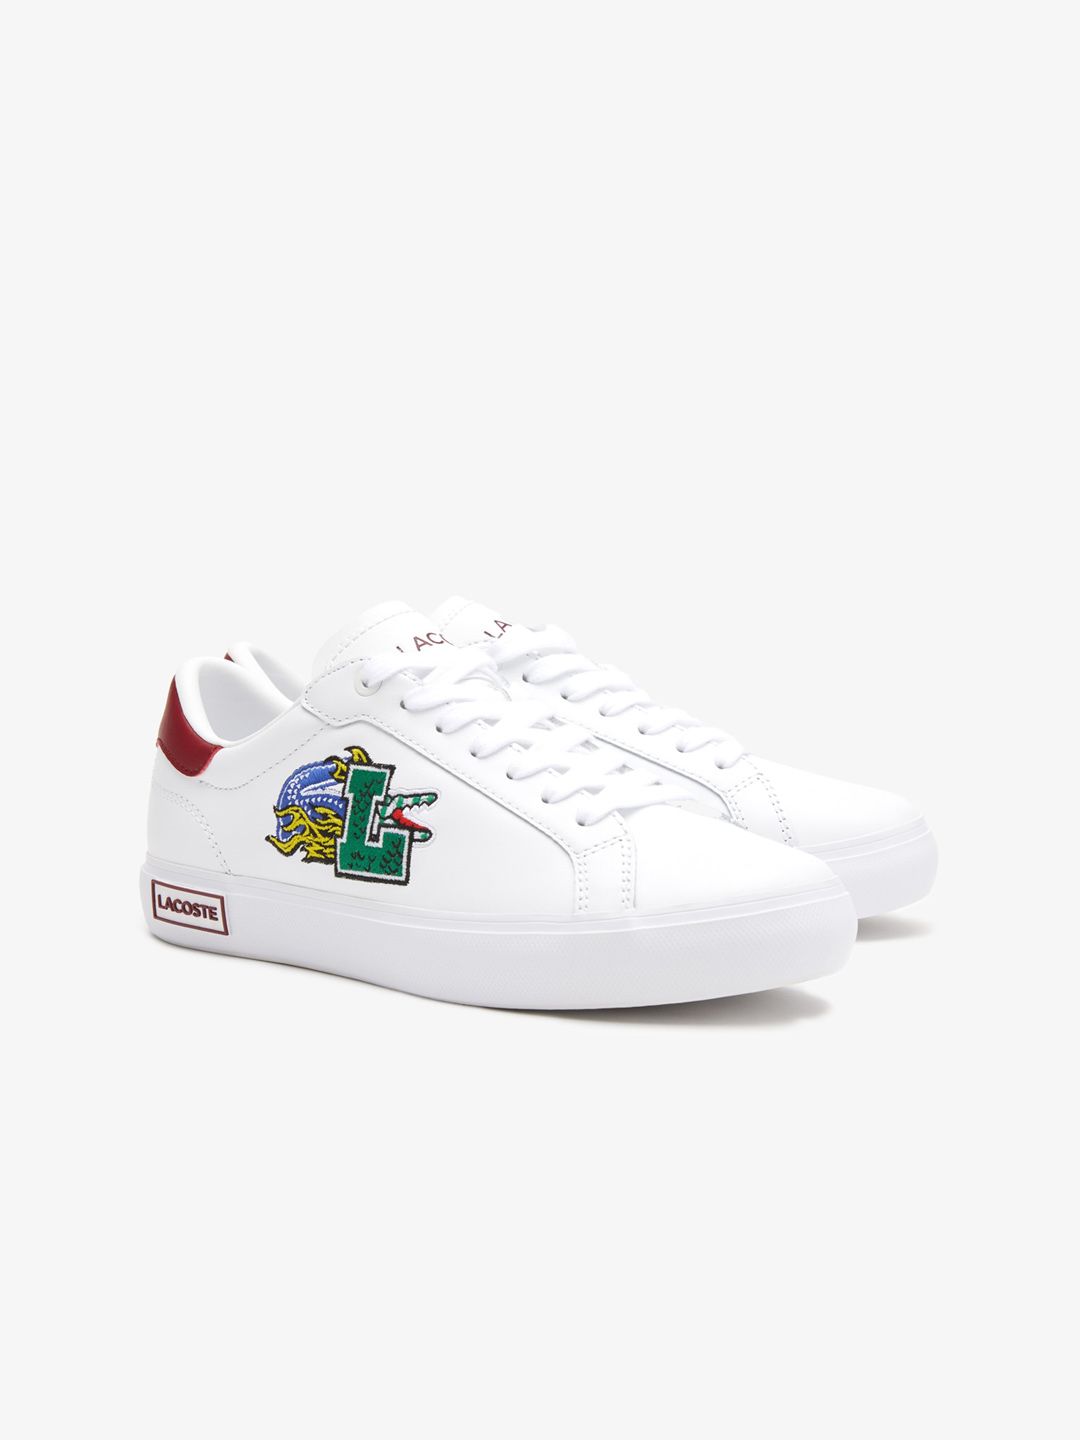 Lacoste Women Powercourt Leather Sneakers Price in India